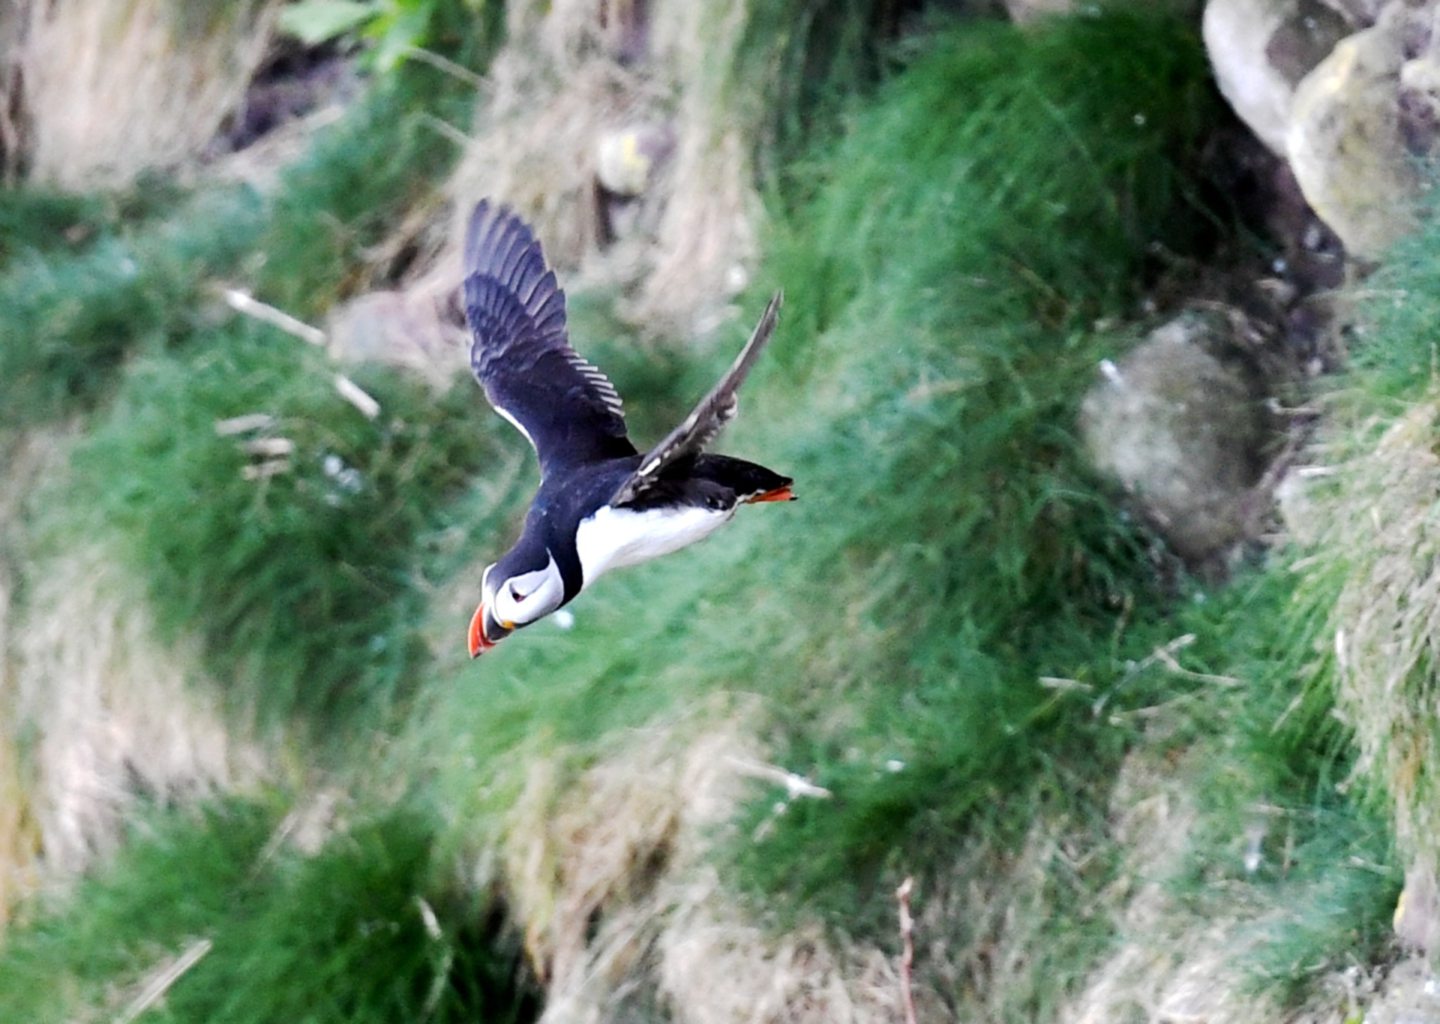 A puffin taking flight at Fowlsheugh.